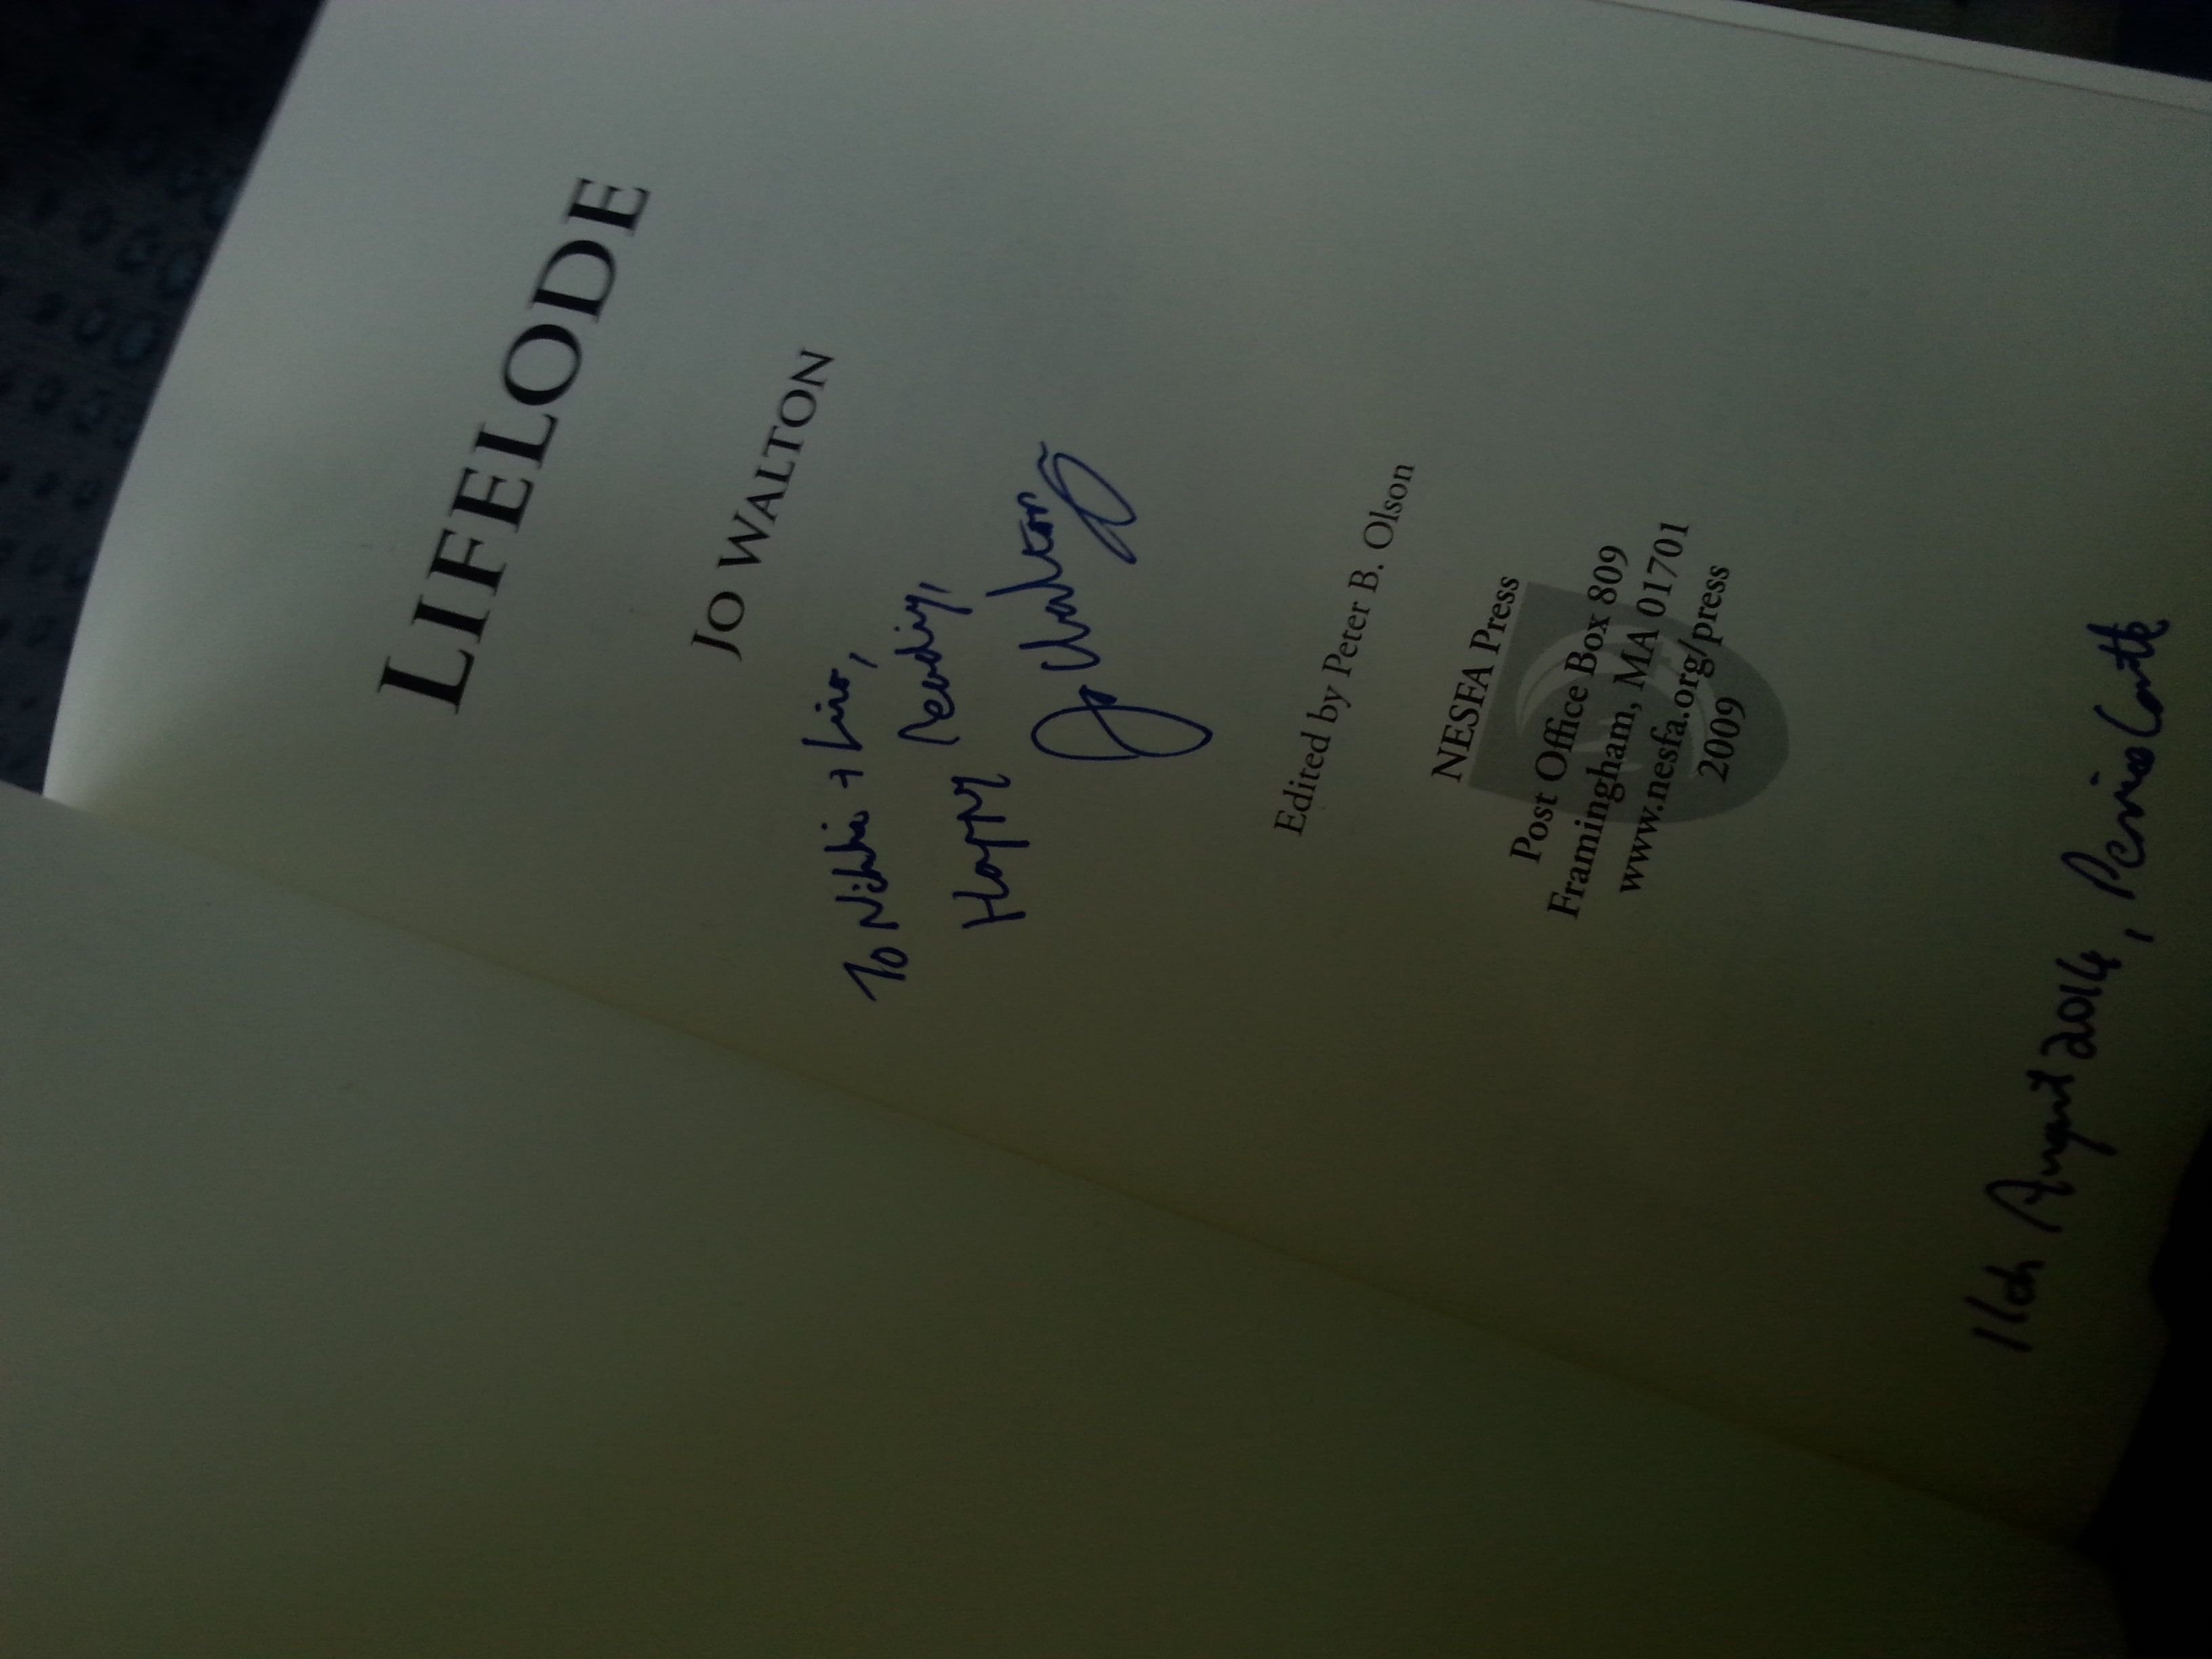 Picture of the title page of Jo Walton's Lifelode, autographed